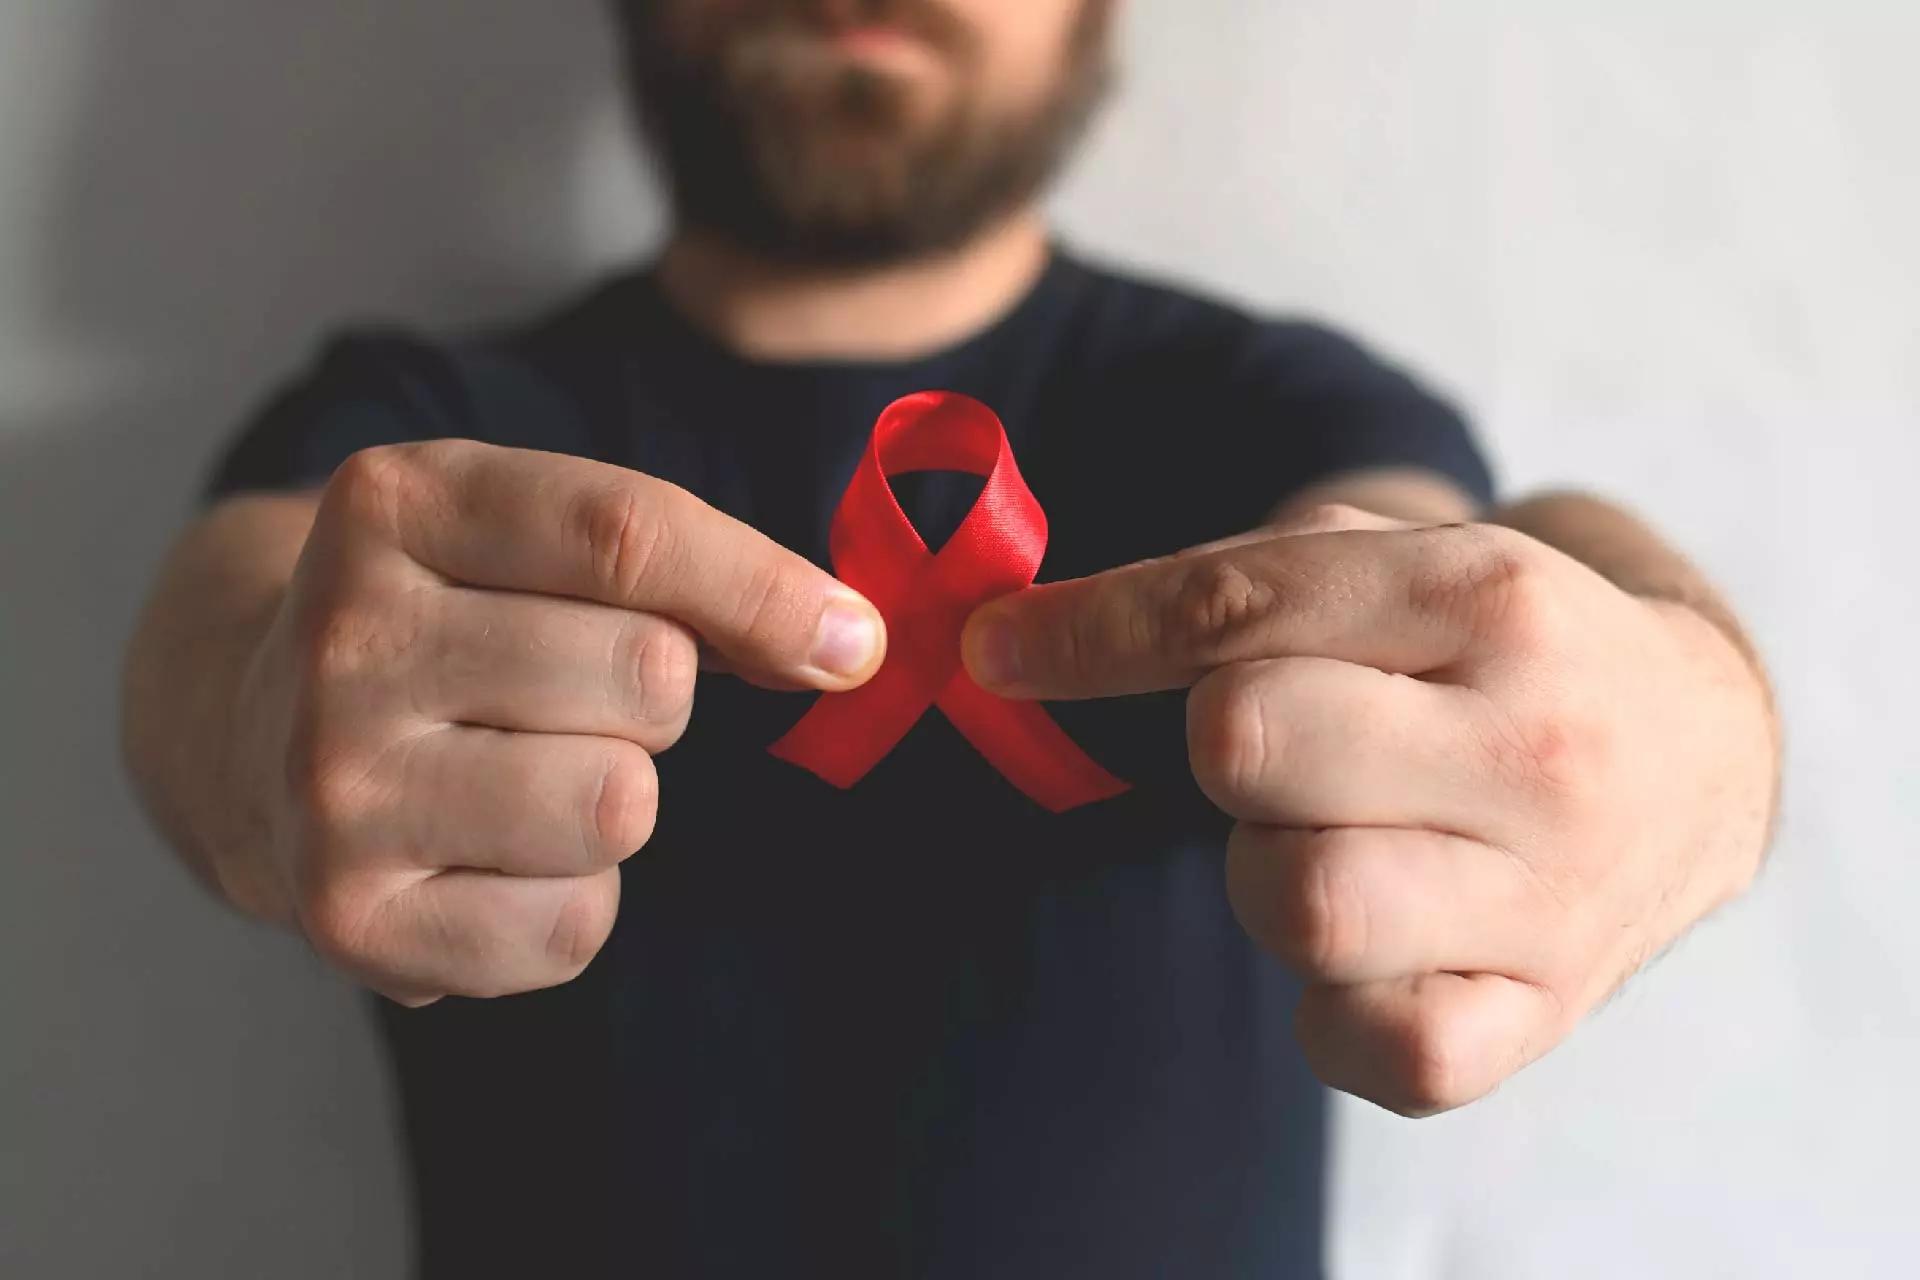 HIV Symptoms in Men: Specific Warning Signs to Watch Out For